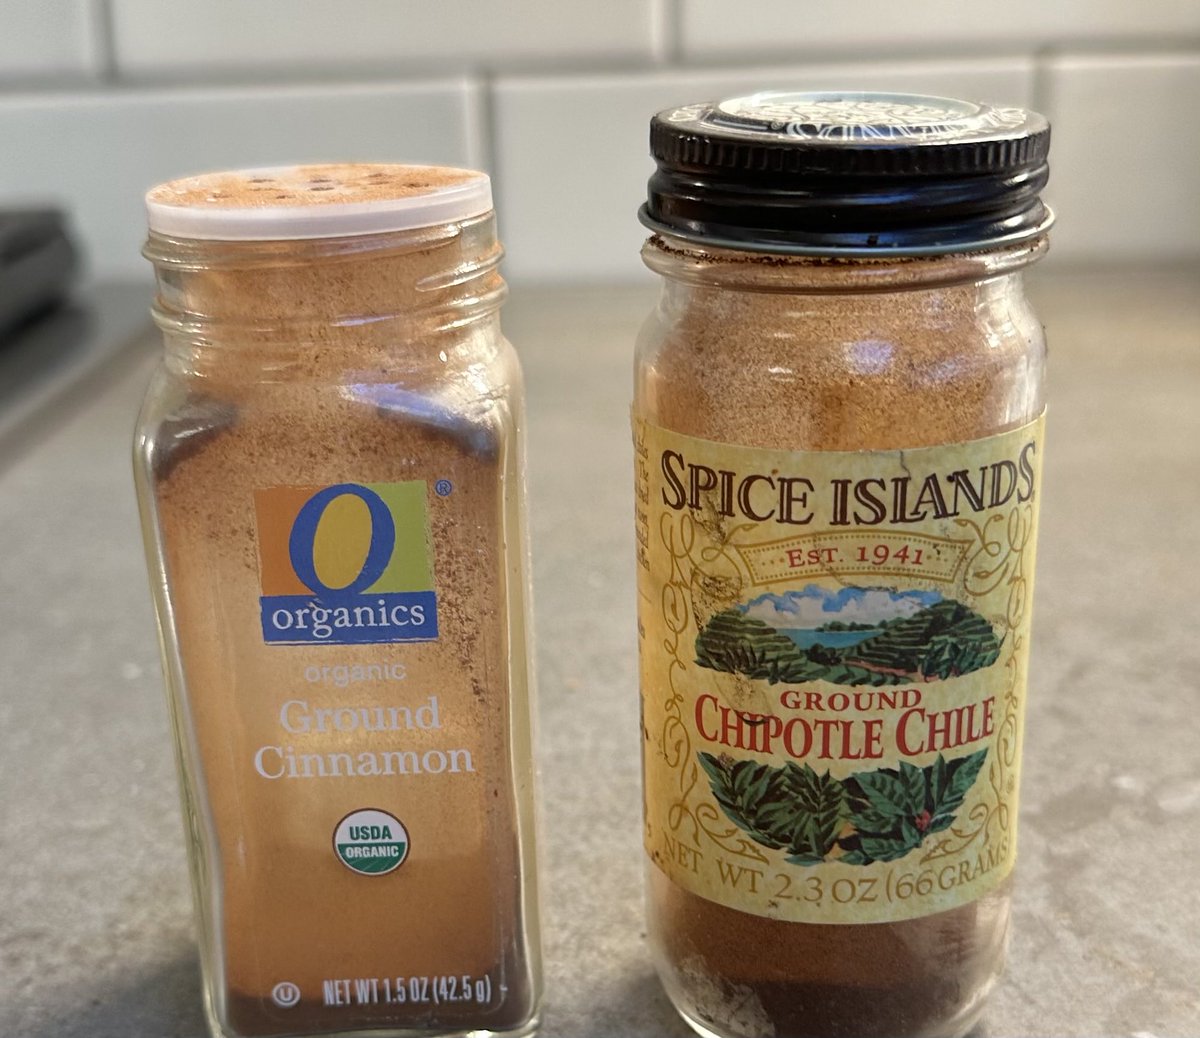 “Parent Lesson Number 57” — When racing around to get our kid’s breakfast and off to school, do not confuse “Chipotle Chile” for “Ground Cinnamon” when making Cinnamon Toast! The canisters may look the same, but the taste 👅 is decidedly different!!!🤪🤪🤪